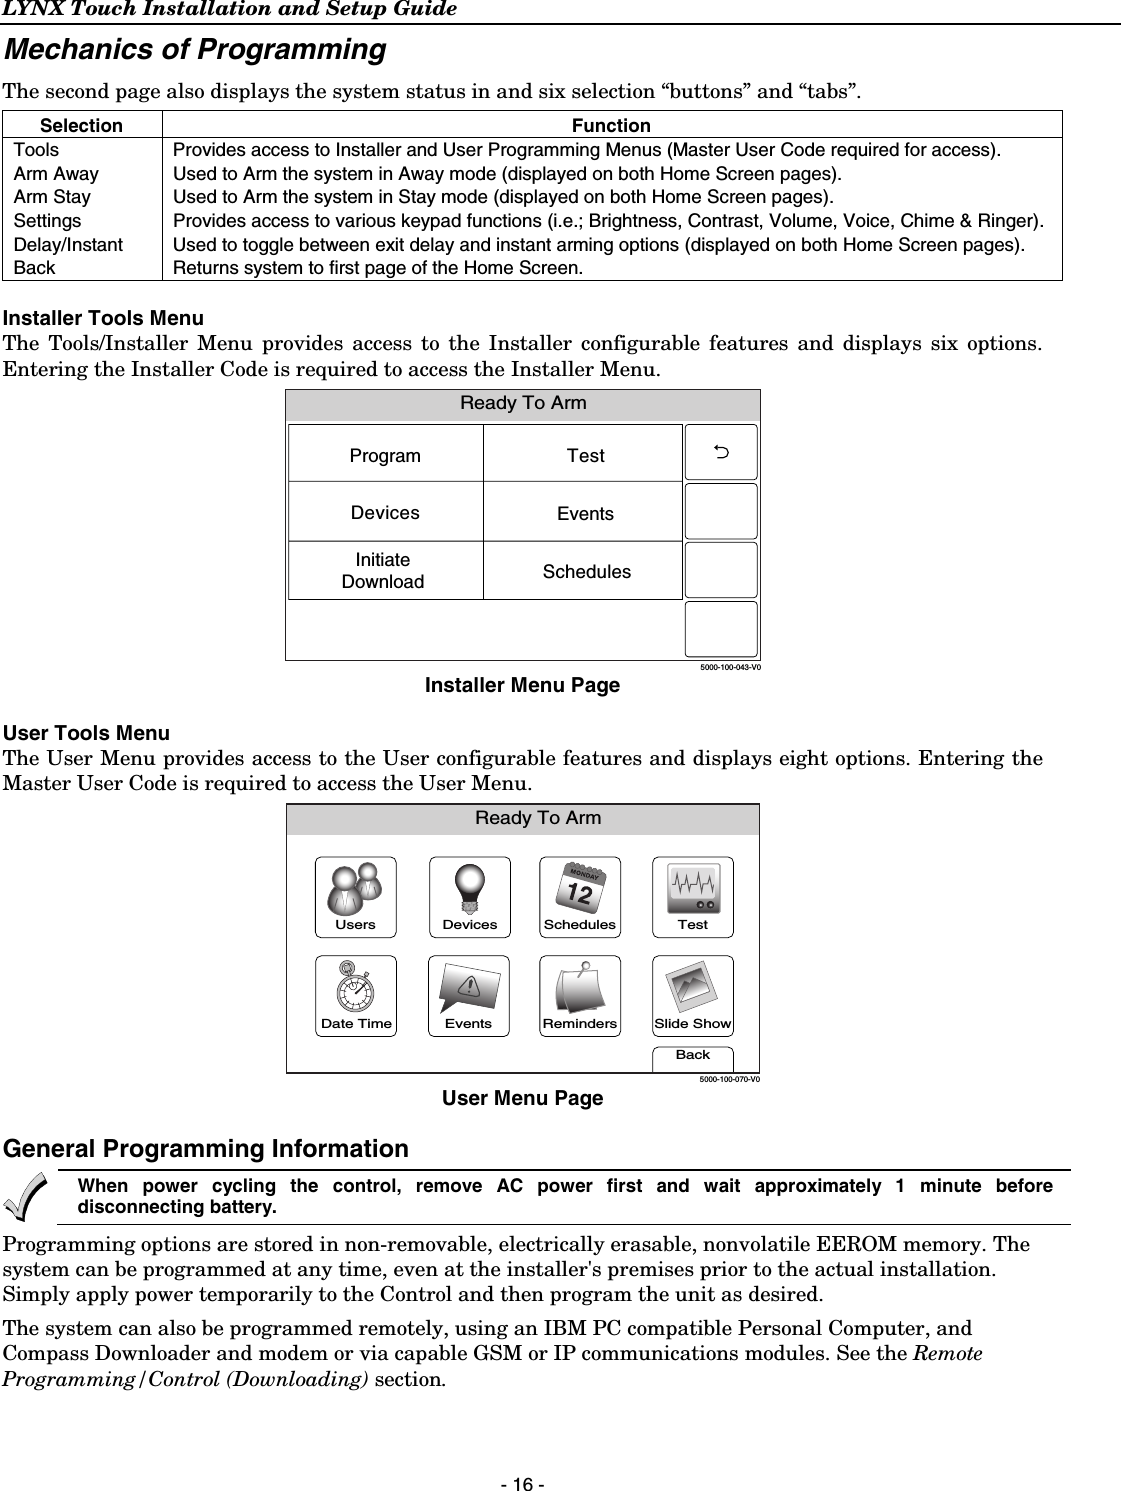 LYNX Touch Installation and Setup Guide  - 16 - Mechanics of Programming  The second page also displays the system status in and six selection “buttons” and “tabs”. Selection Function Tools  Provides access to Installer and User Programming Menus (Master User Code required for access). Arm Away  Used to Arm the system in Away mode (displayed on both Home Screen pages). Arm Stay  Used to Arm the system in Stay mode (displayed on both Home Screen pages). Settings  Provides access to various keypad functions (i.e.; Brightness, Contrast, Volume, Voice, Chime &amp; Ringer). Delay/Instant   Used to toggle between exit delay and instant arming options (displayed on both Home Screen pages). Back  Returns system to first page of the Home Screen.  Installer Tools Menu The Tools/Installer Menu provides access to the Installer configurable features and displays six options. Entering the Installer Code is required to access the Installer Menu.  Ready To Arm5000-100-043-V0ProgramEventsSchedulesTestInitiateDownloadDevices Installer Menu Page  User Tools Menu The User Menu provides access to the User configurable features and displays eight options. Entering the Master User Code is required to access the User Menu.  Slide ShowDate TimeReady To ArmEventsBackRemindersTestSchedulesDevicesUsers5000-100-070-V0 User Menu Page  General Programming Information  When power cycling the control, remove AC power first and wait approximately 1 minute before disconnecting battery. Programming options are stored in non-removable, electrically erasable, nonvolatile EEROM memory. The system can be programmed at any time, even at the installer&apos;s premises prior to the actual installation. Simply apply power temporarily to the Control and then program the unit as desired.  The system can also be programmed remotely, using an IBM PC compatible Personal Computer, and Compass Downloader and modem or via capable GSM or IP communications modules. See the Remote Programming/Control (Downloading) section.  